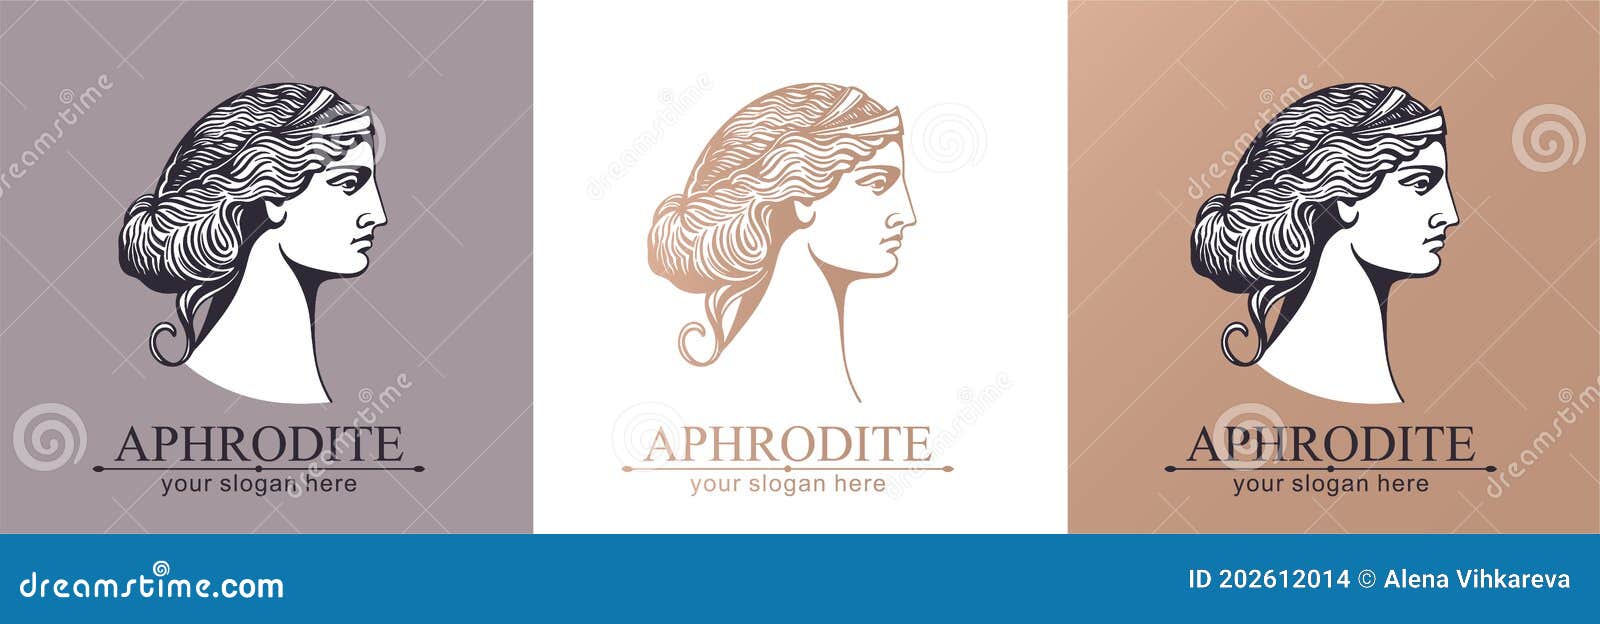 Aphrodite Or Venus Woman Face Logo Emblem For A Beauty Or Yoga Salon Style Of Harmony And Beauty Vector Illustration Stock Illustration Illustration Of Care Face 202612014